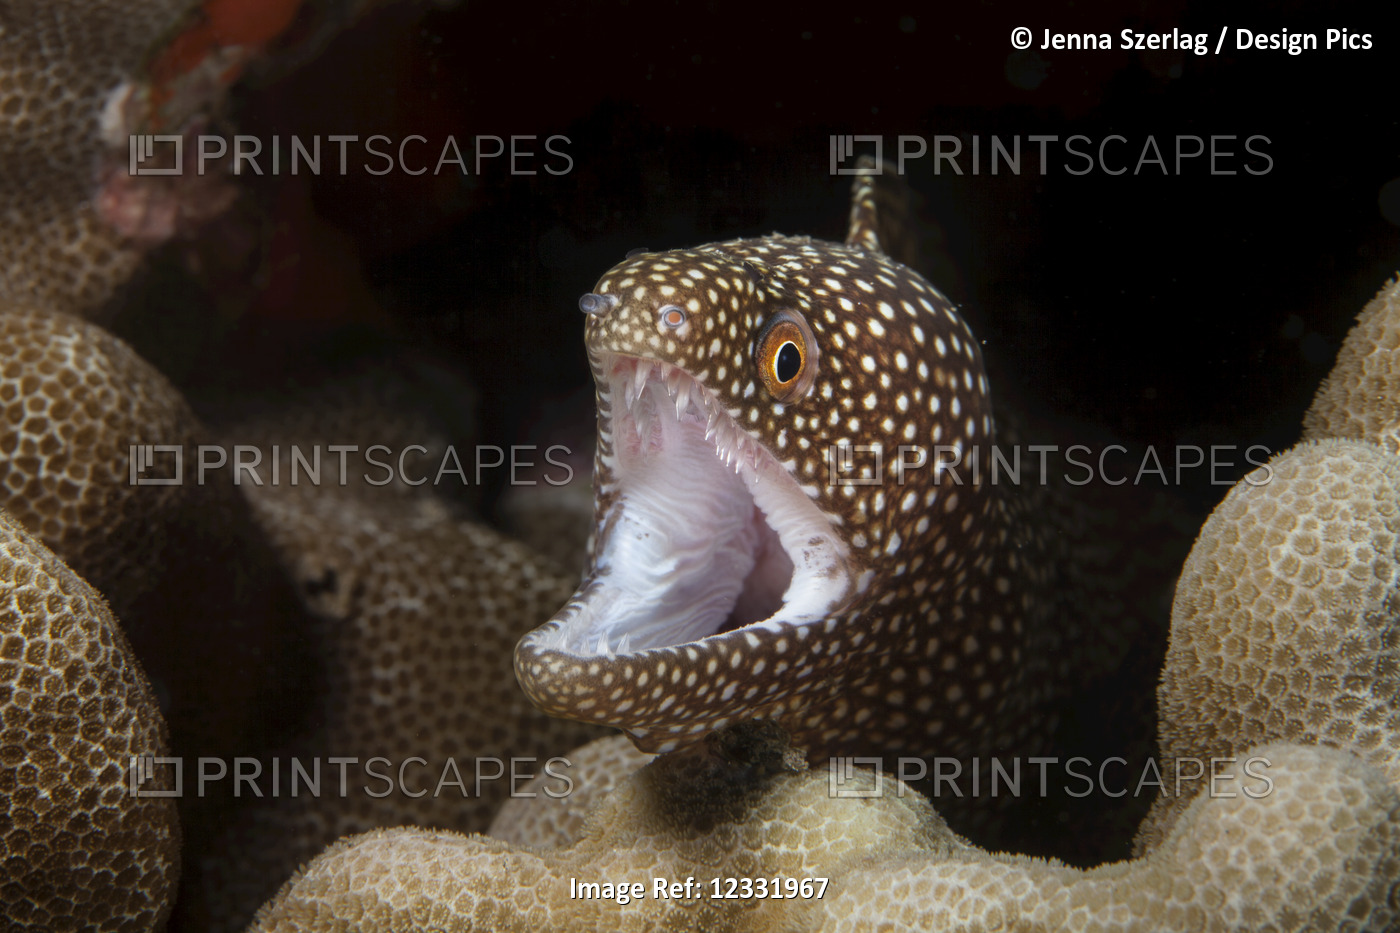 A close-up underwater view of a Whitemouth Moray eel (Gymnothorax meleagris); ...